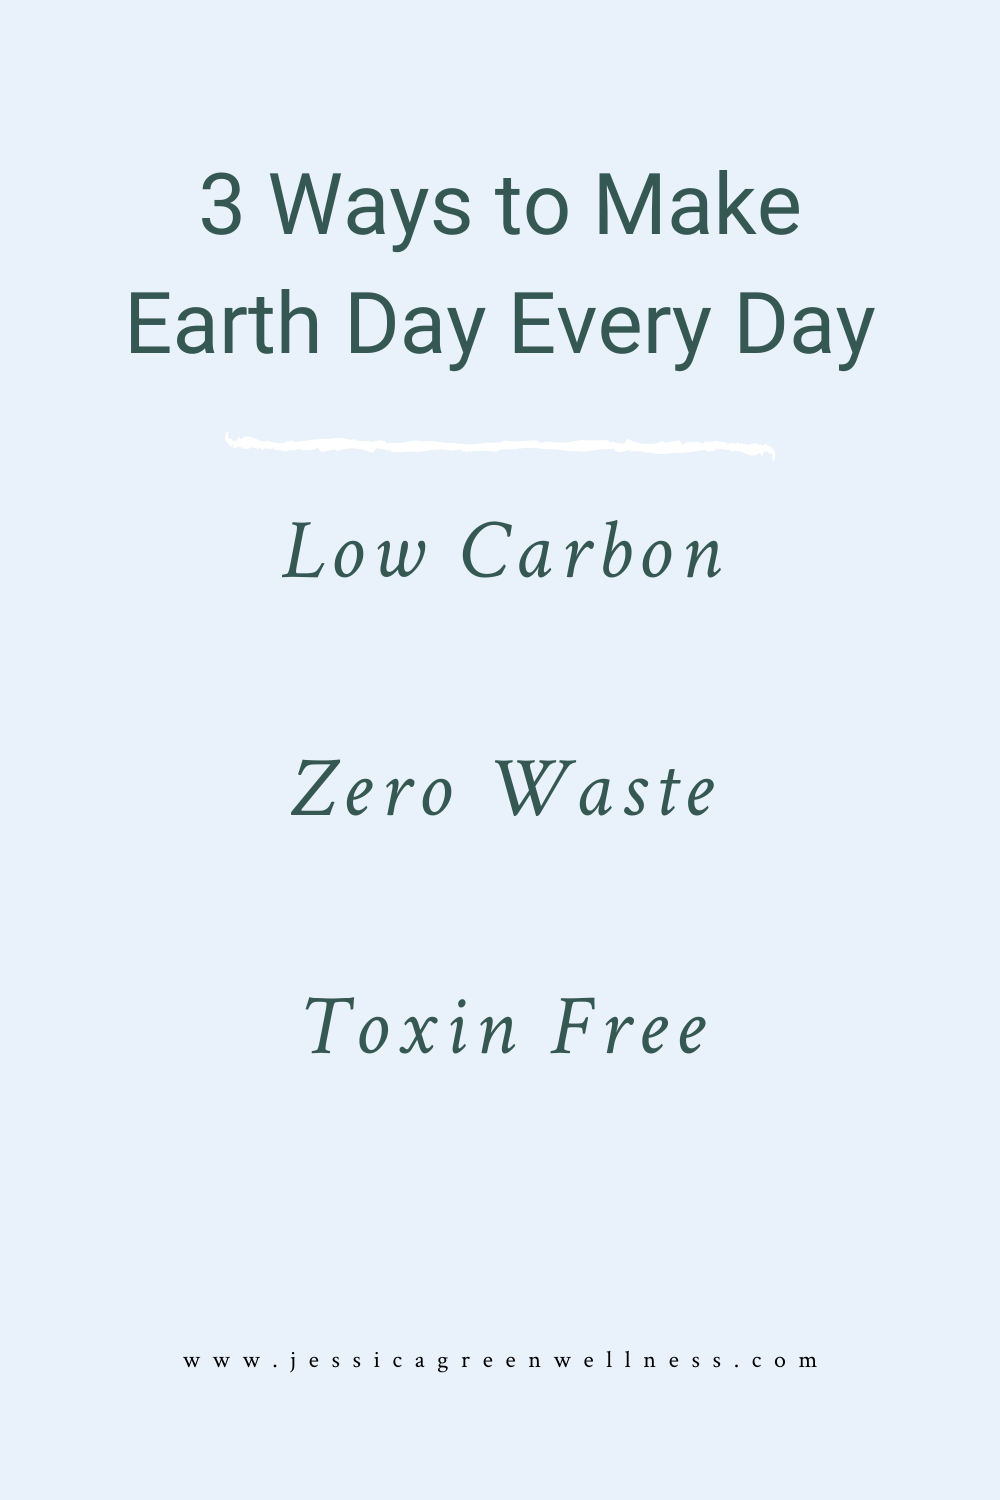 3 Ways to Make Earth Day Every Day